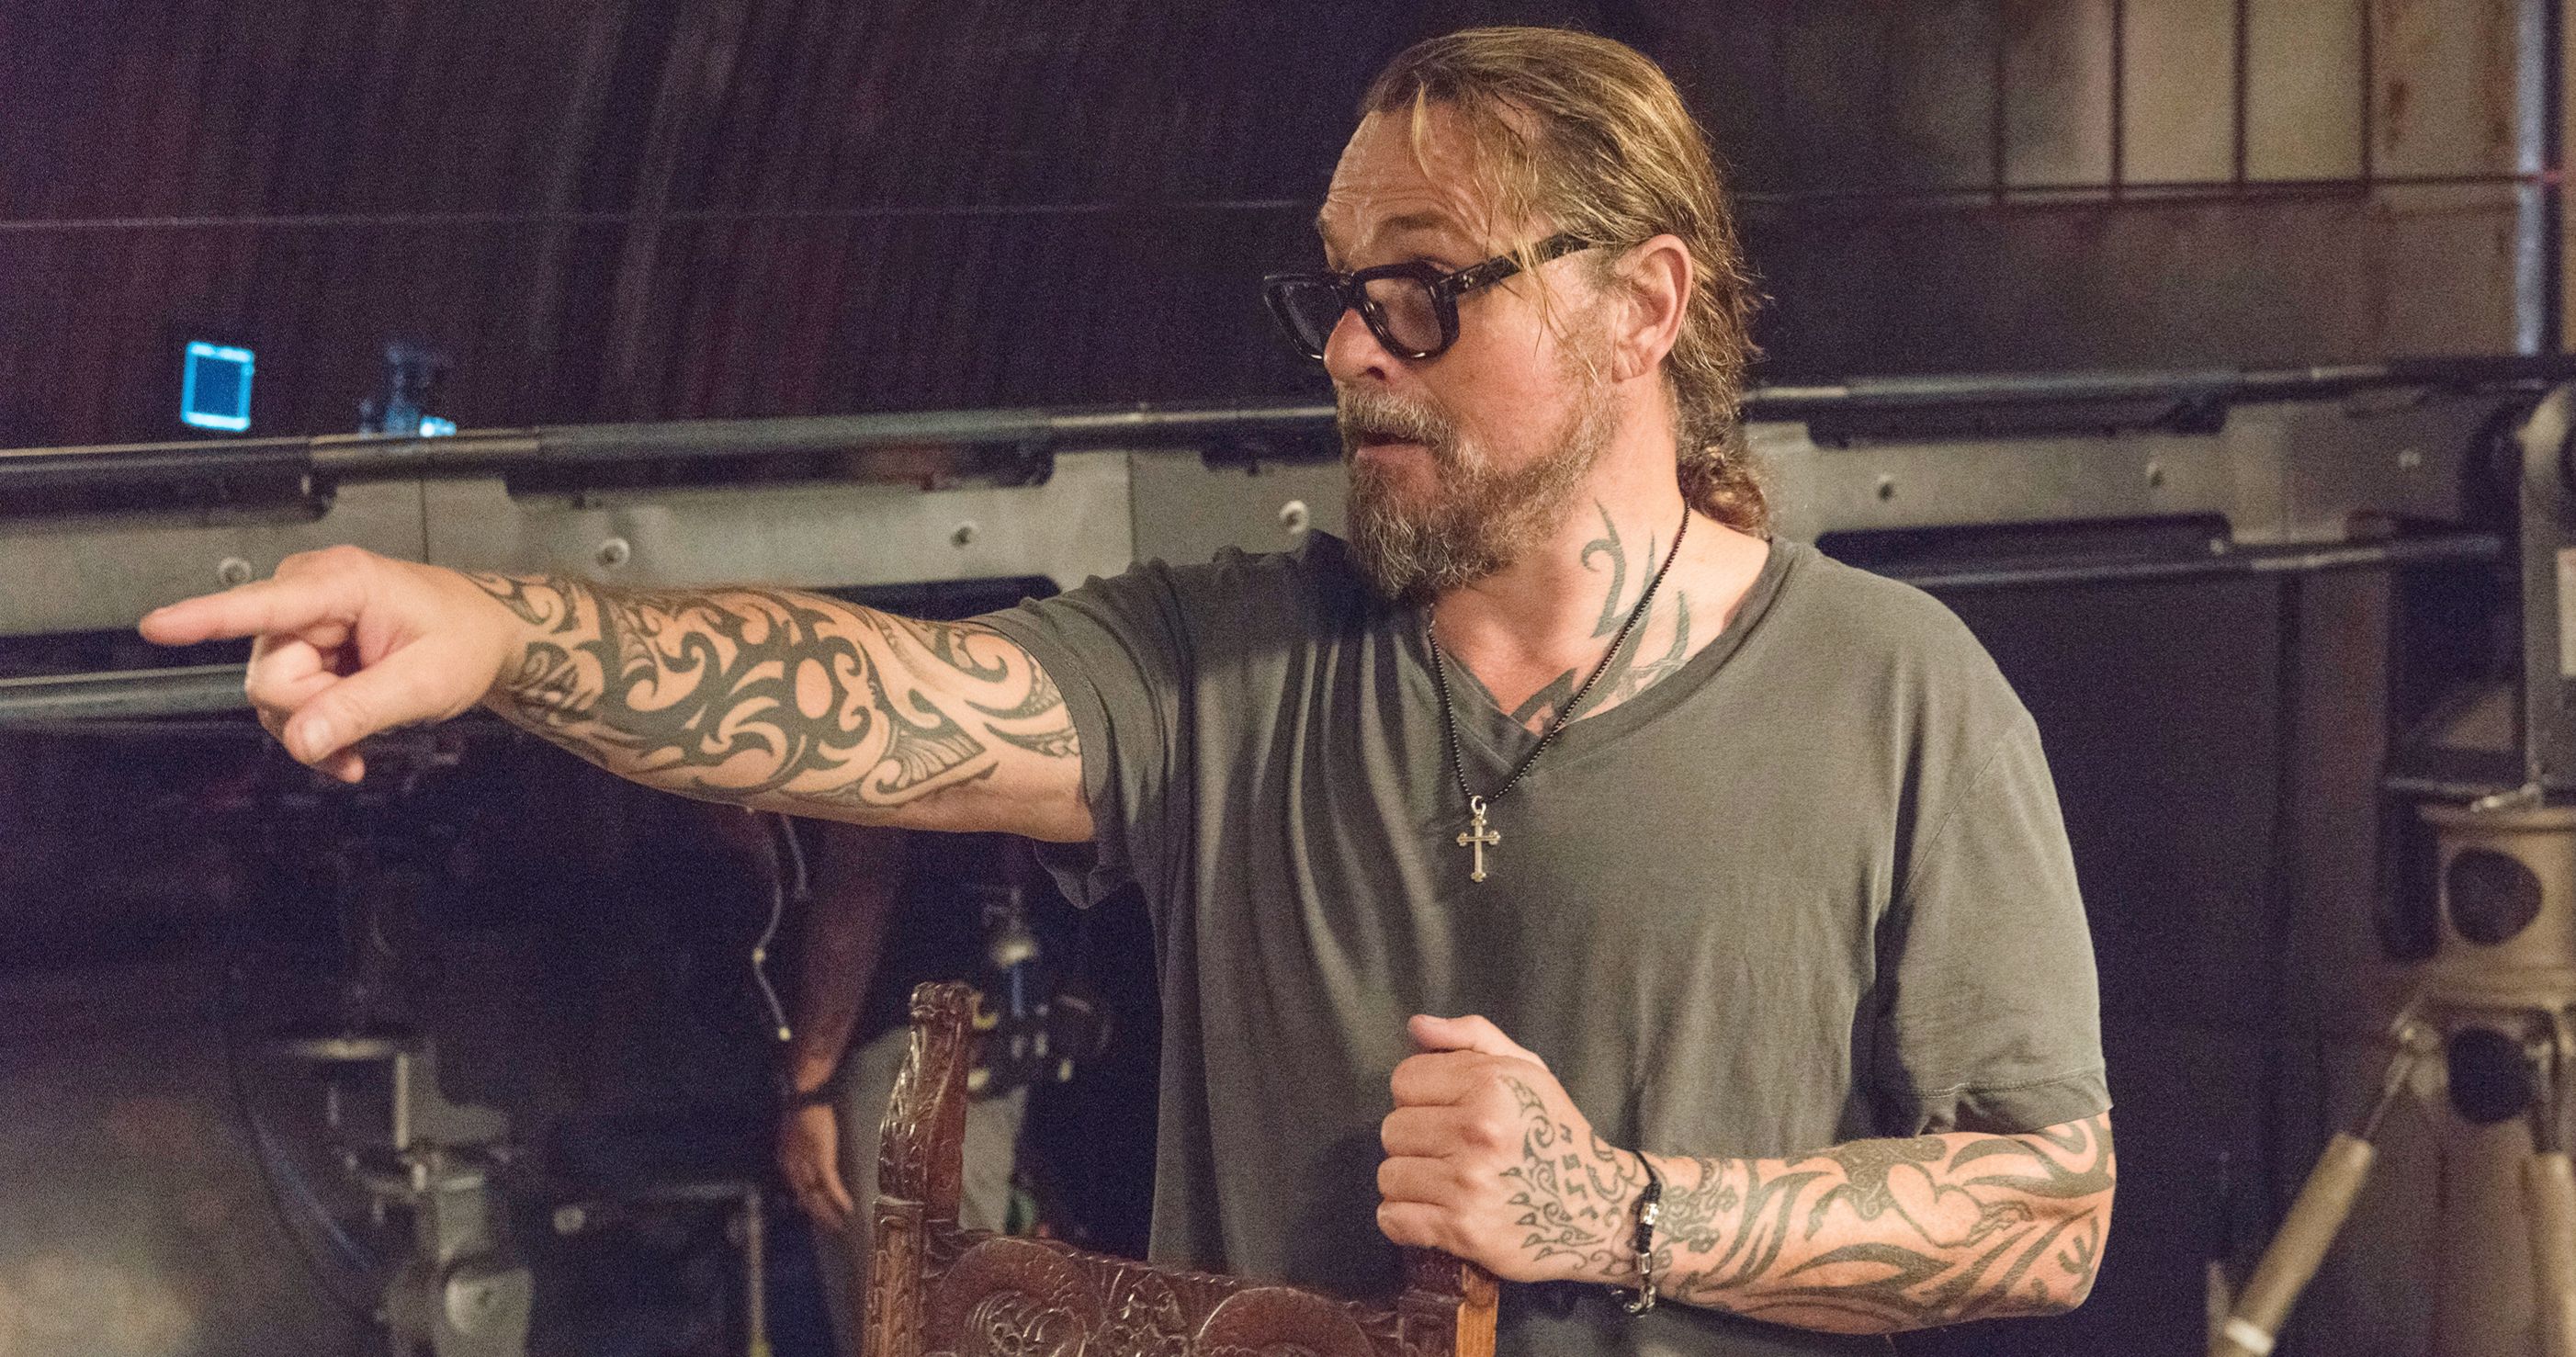 Sons of Anarchy Creator Kurt Sutter Will Make Directorial Debut with Netflix's This Beast